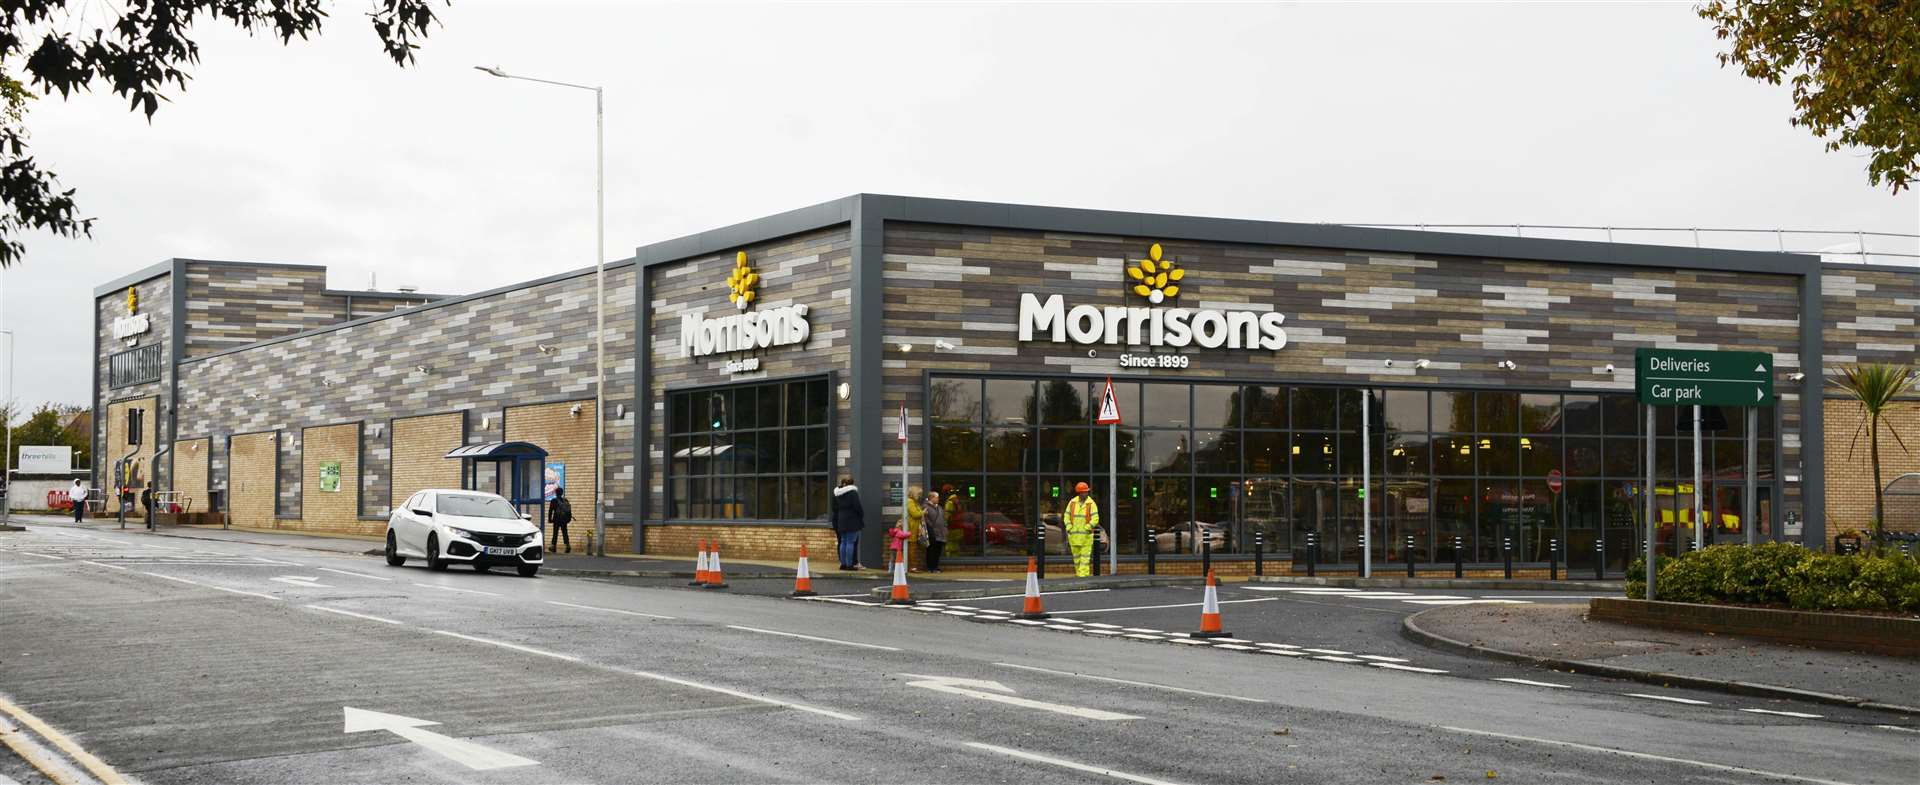 The new Morrisons store is now open. Picture: Paul Amos